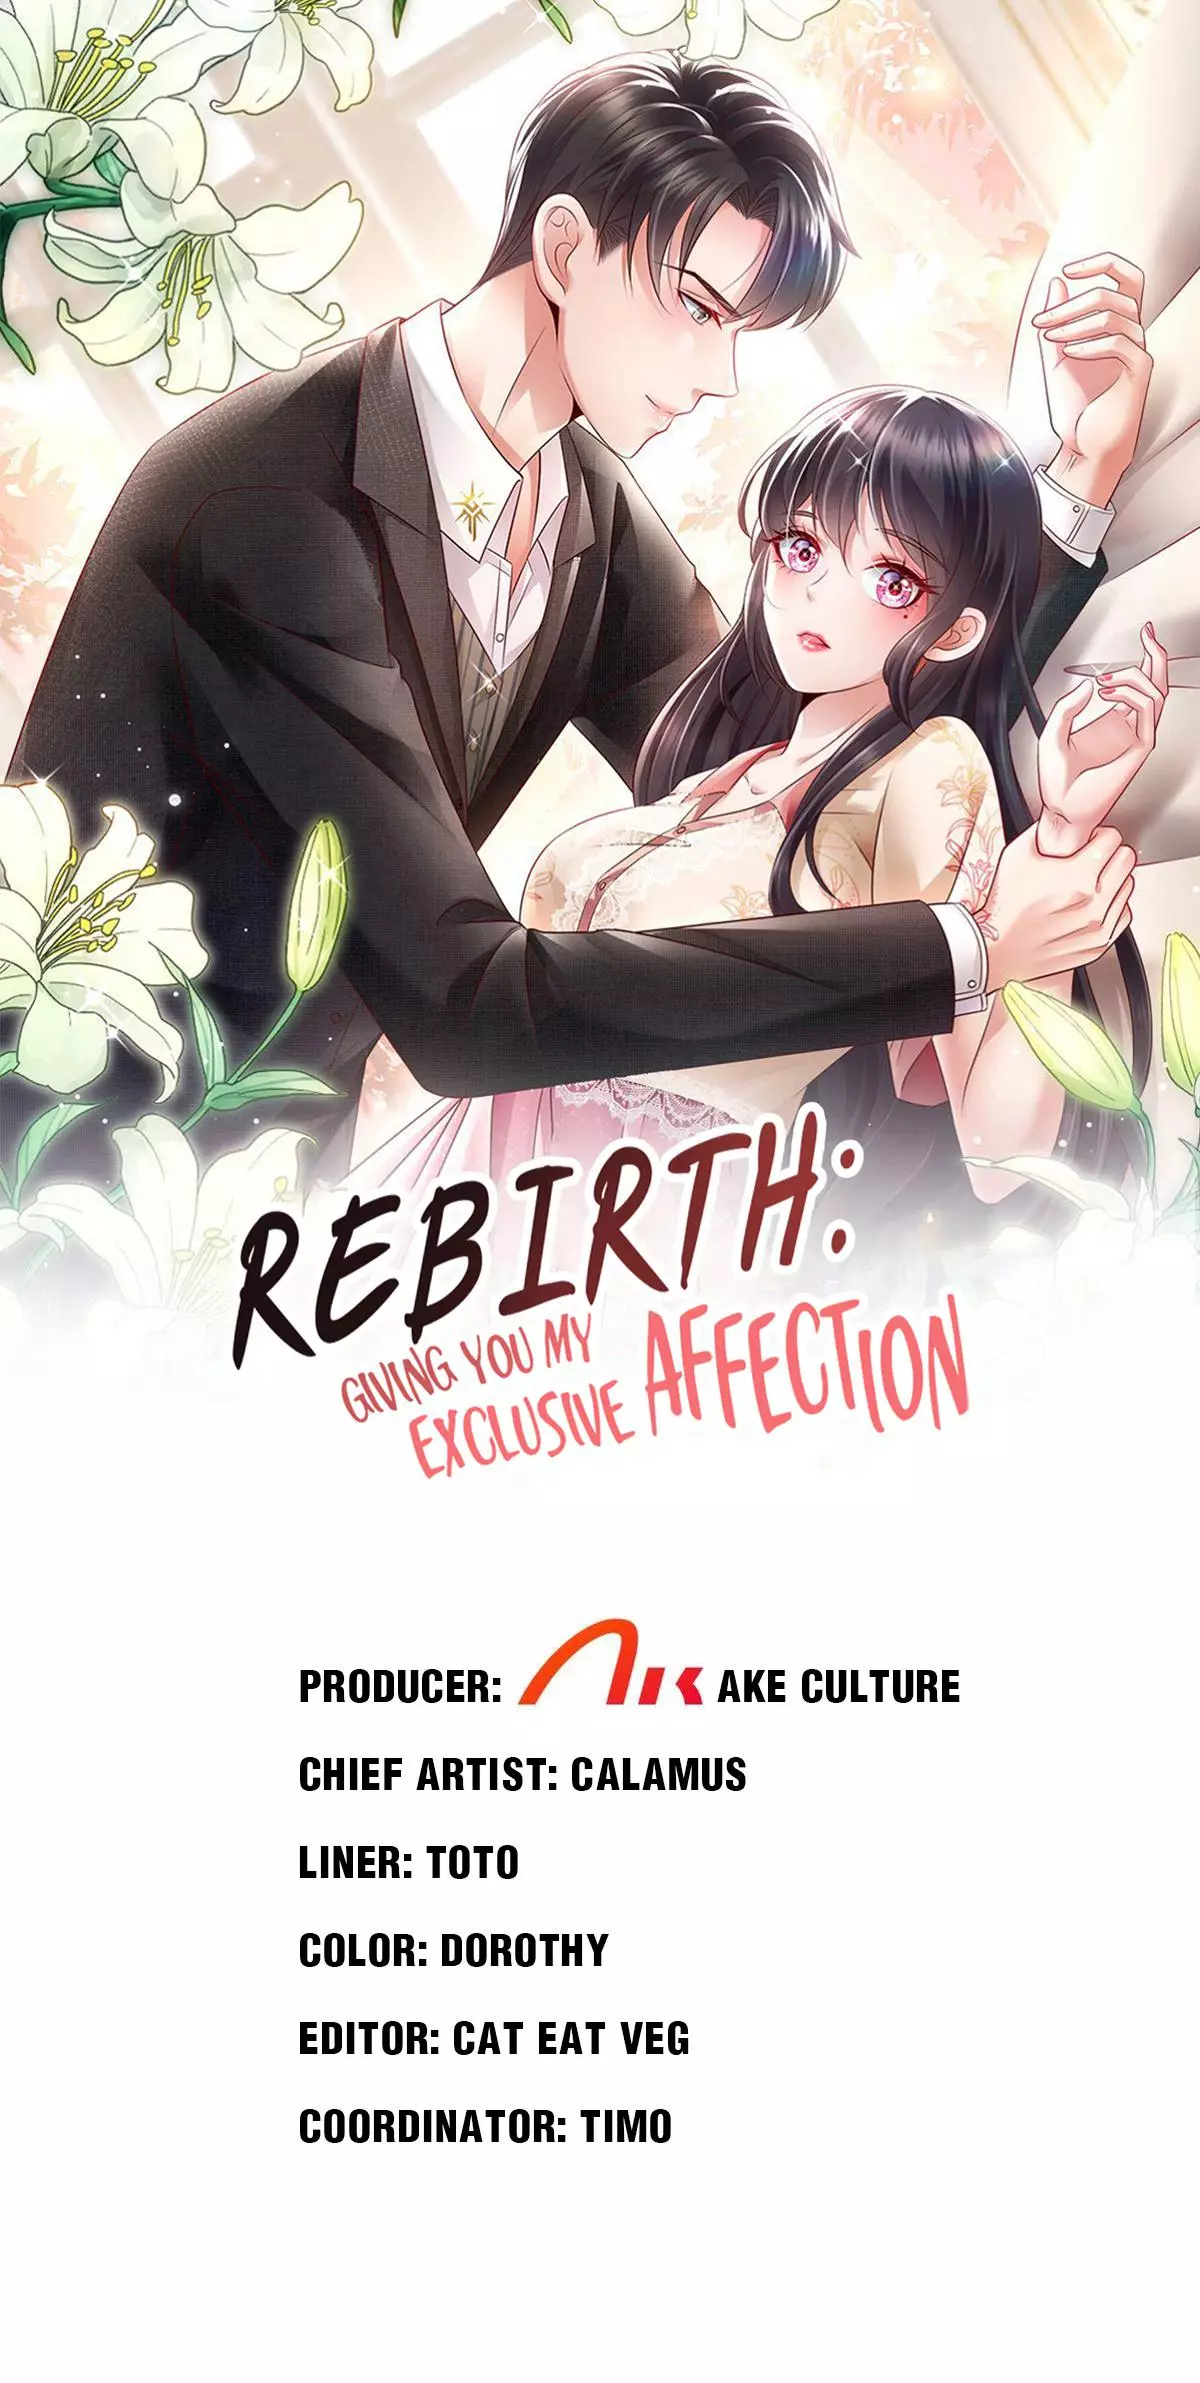 Rebirth: Giving You My Exclusive Affection - 121 page 1-c4b1a01a